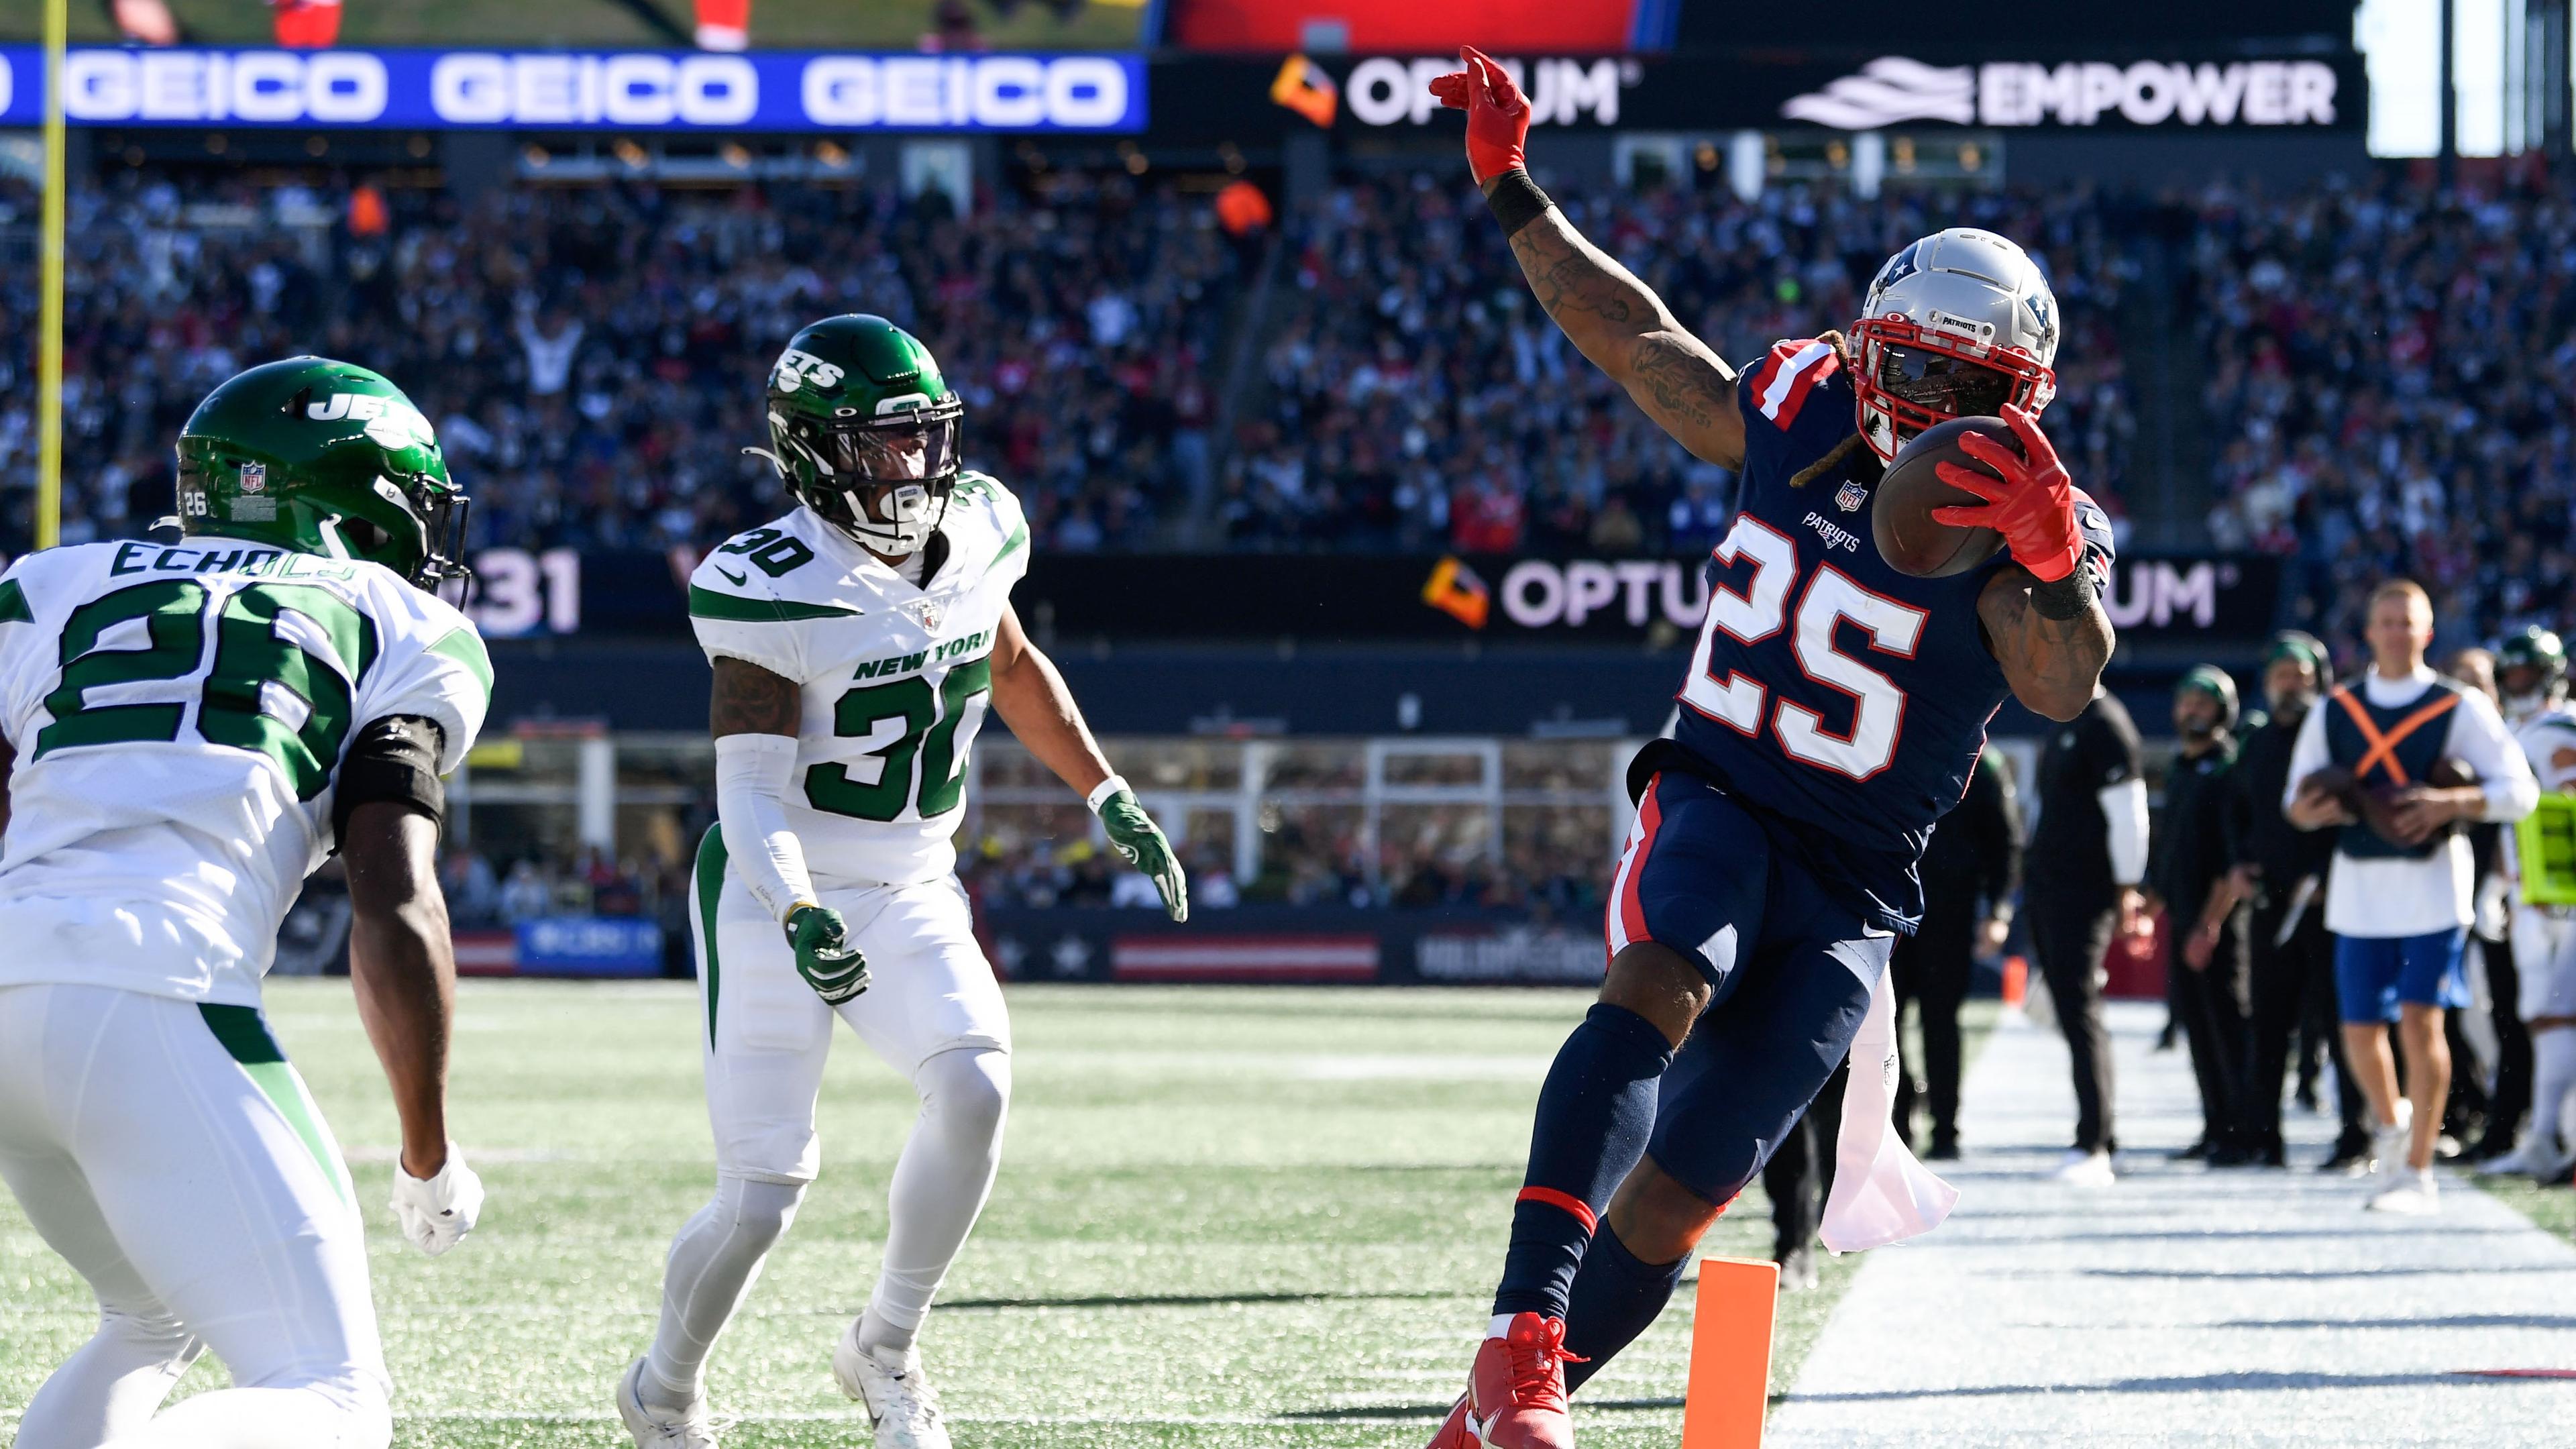 Oct 24, 2021; Foxborough, Massachusetts, USA; New England Patriots running back Brandon Bolden (25) scores a touchdown against the New York Jets during the first half at Gillette Stadium. Mandatory Credit: Brian Fluharty-USA TODAY Sports / Brian Fluharty-USA TODAY Sports